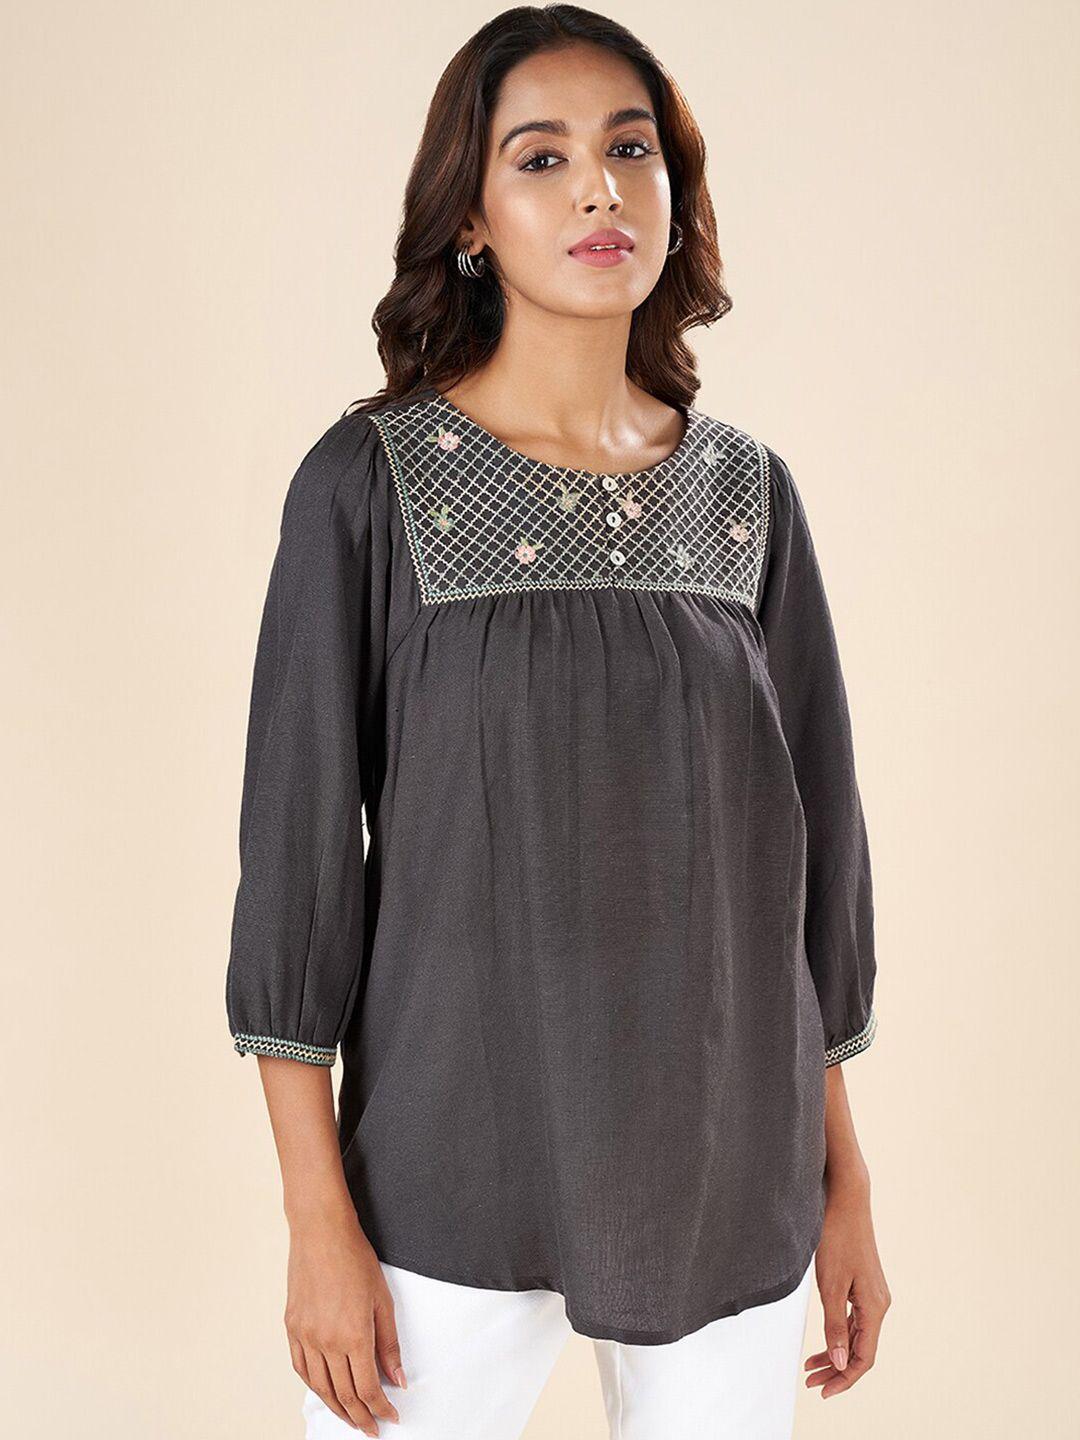 AKKRITI BY PANTALOONS Floral Embroidered Tunic